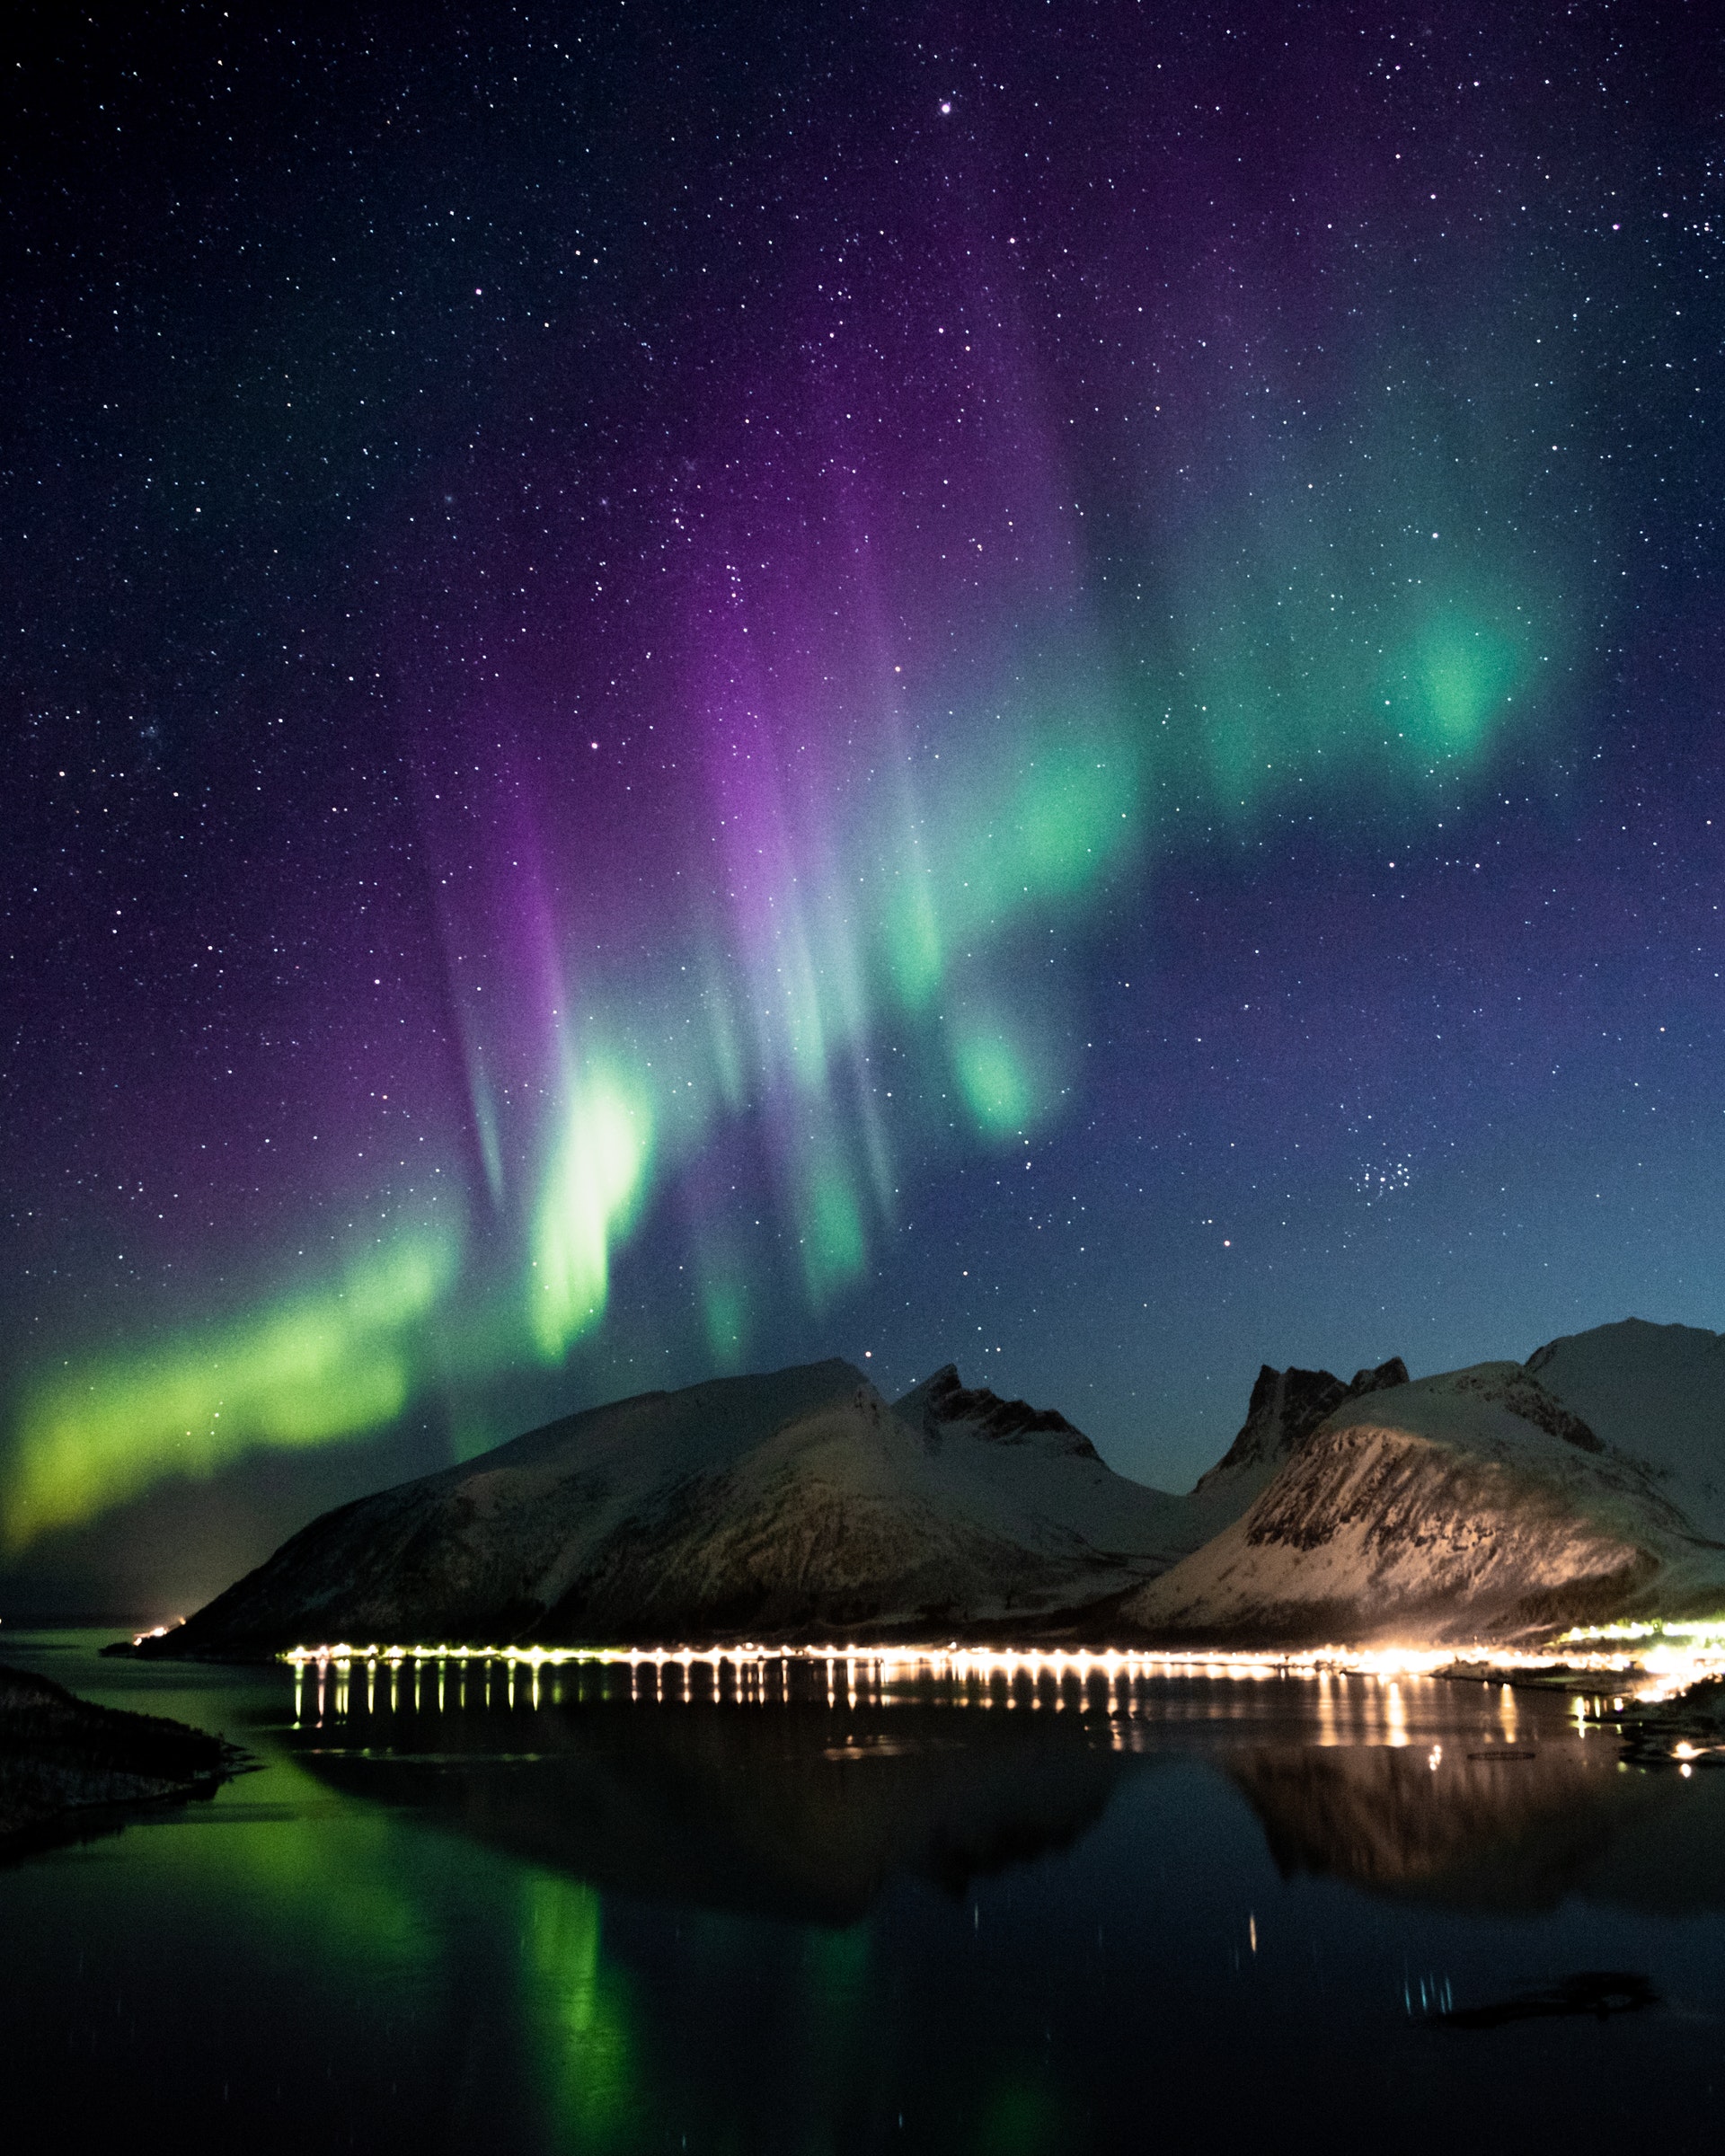 My Ultimate Dream Vacation – Seeing the Northern Lights